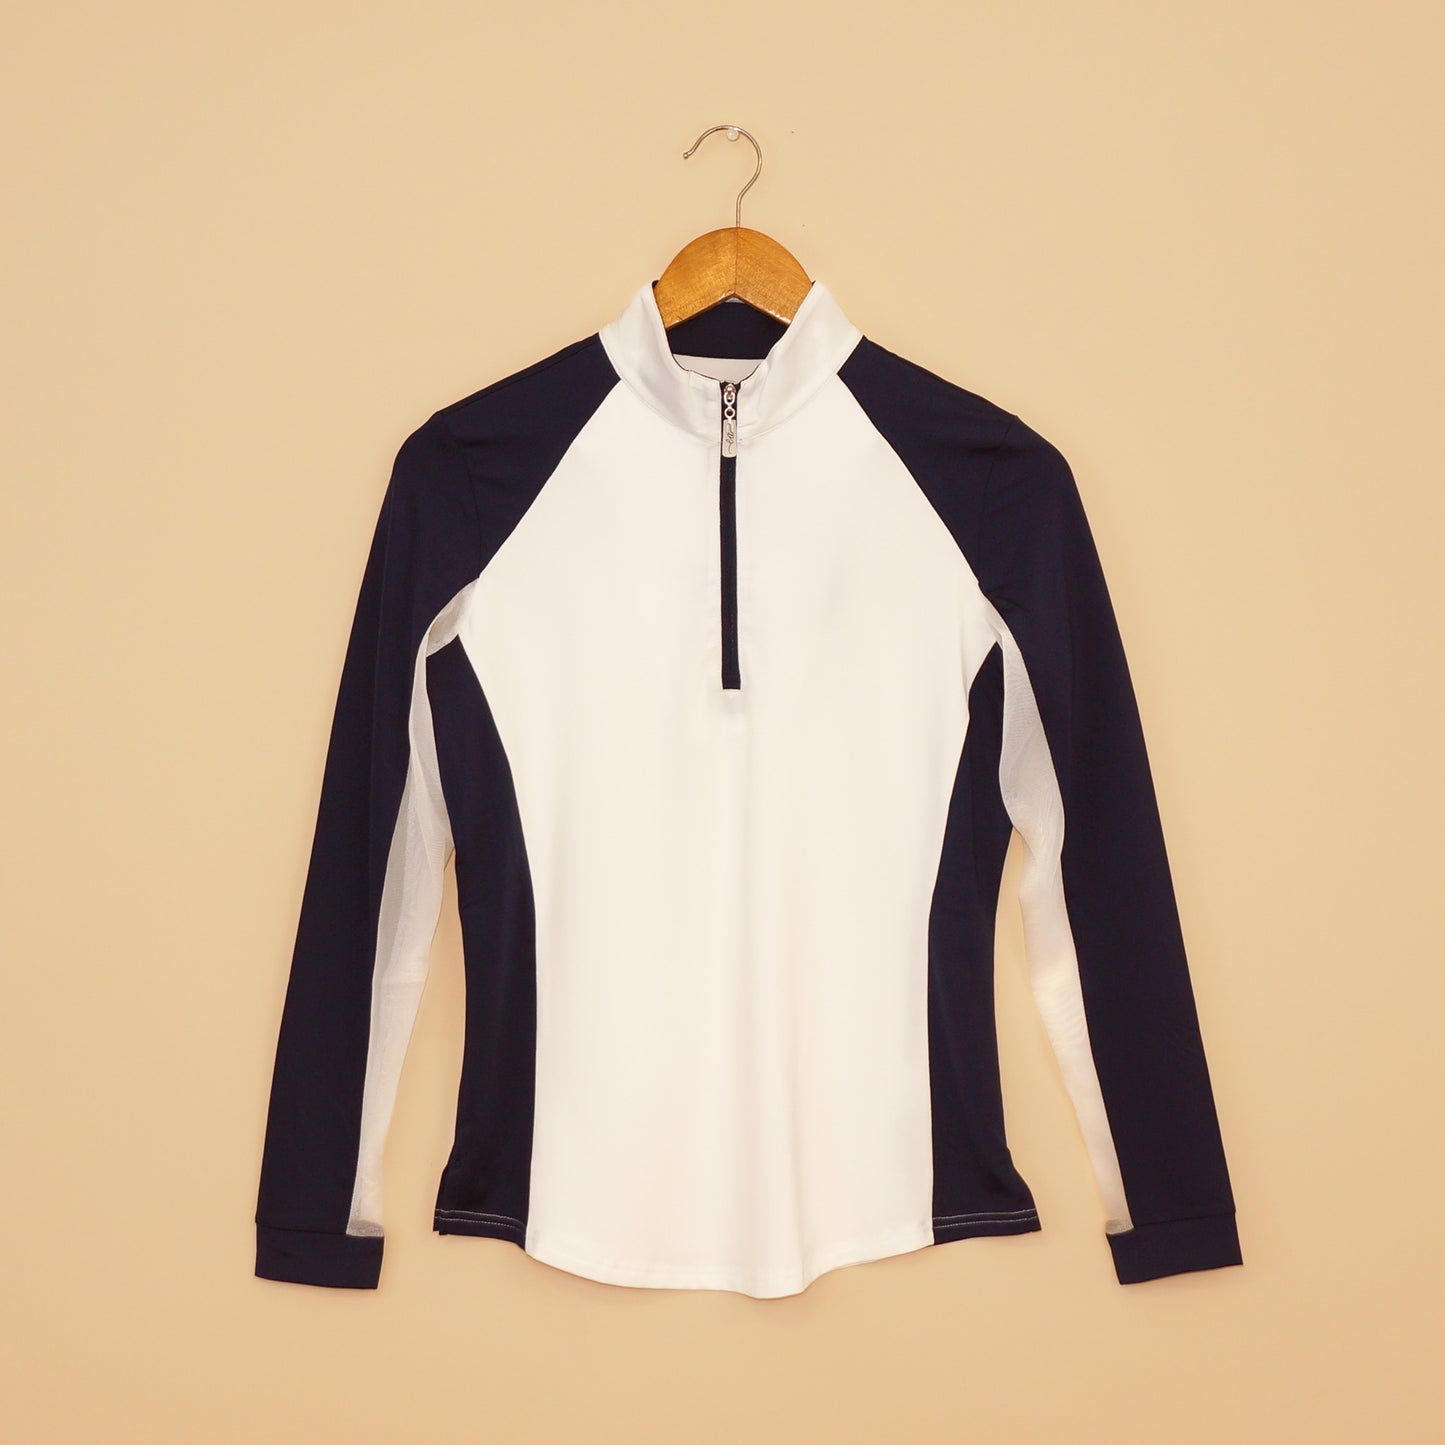 Navy and white Contrast Panel Sun Shirt by EA Limited Inc., featuring a quarter zip design and UPF 50+ protection, perfect for outdoor activities